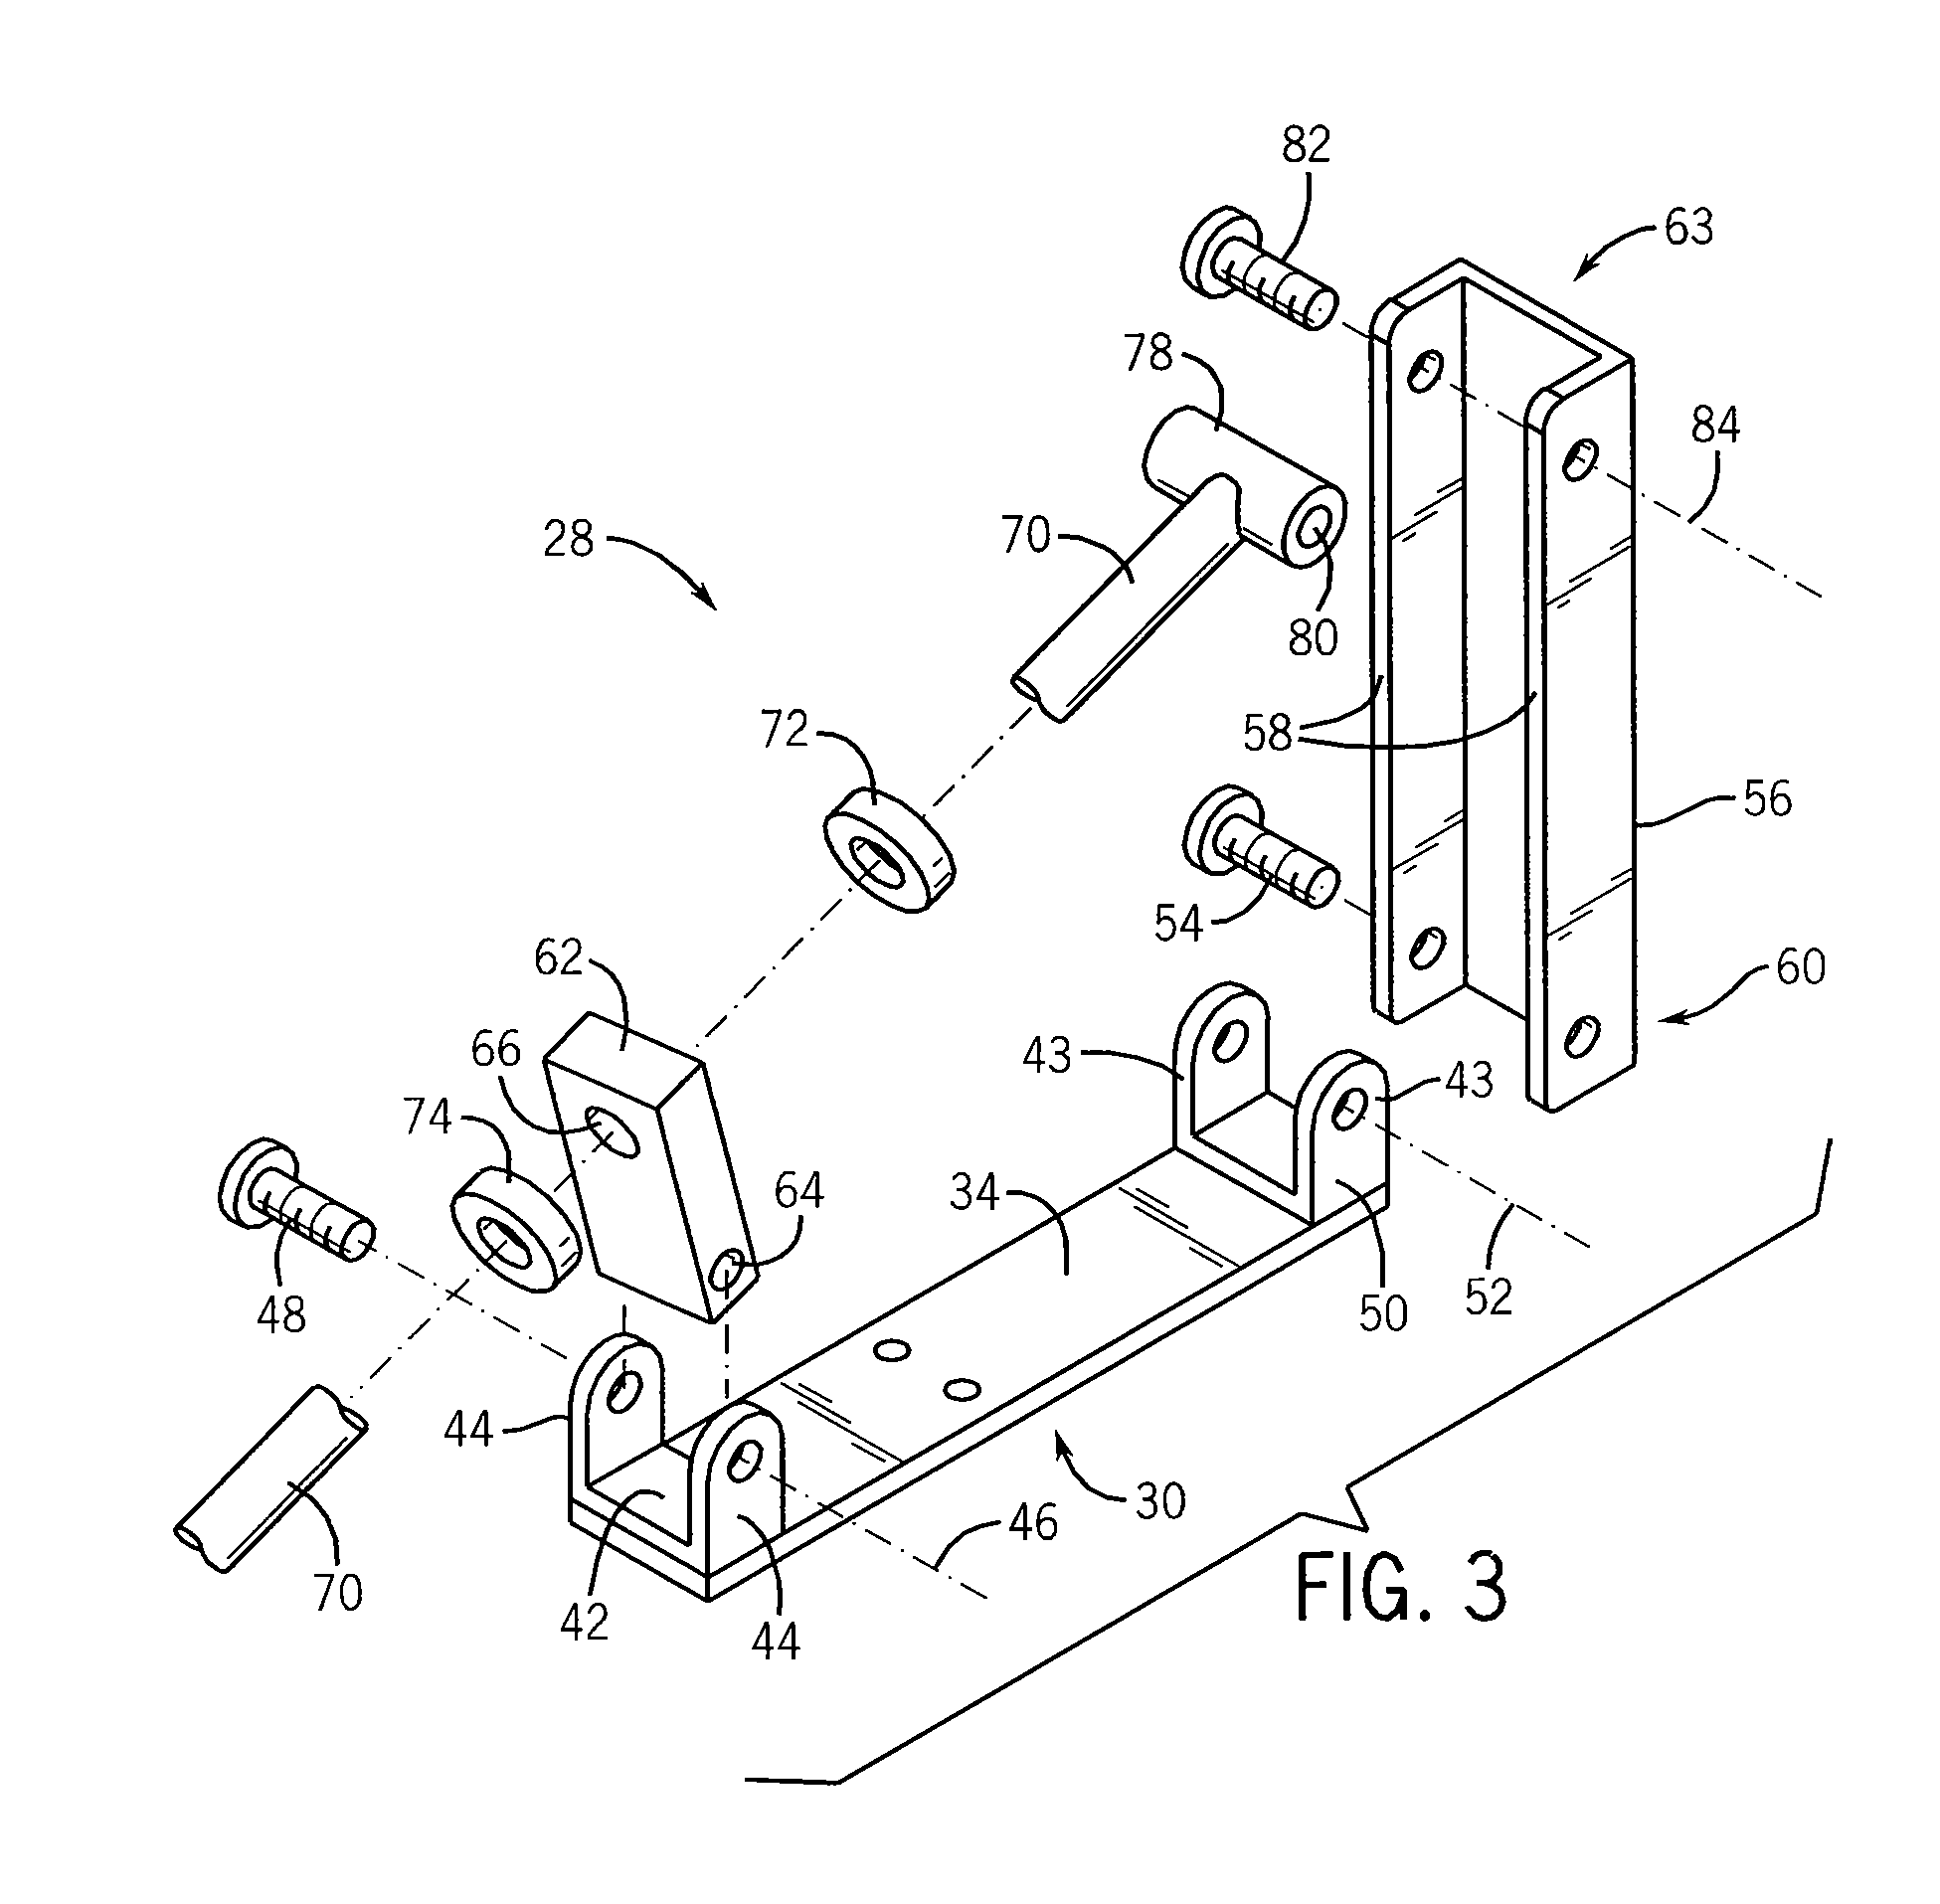 Reactive headrest system for disabled individuals